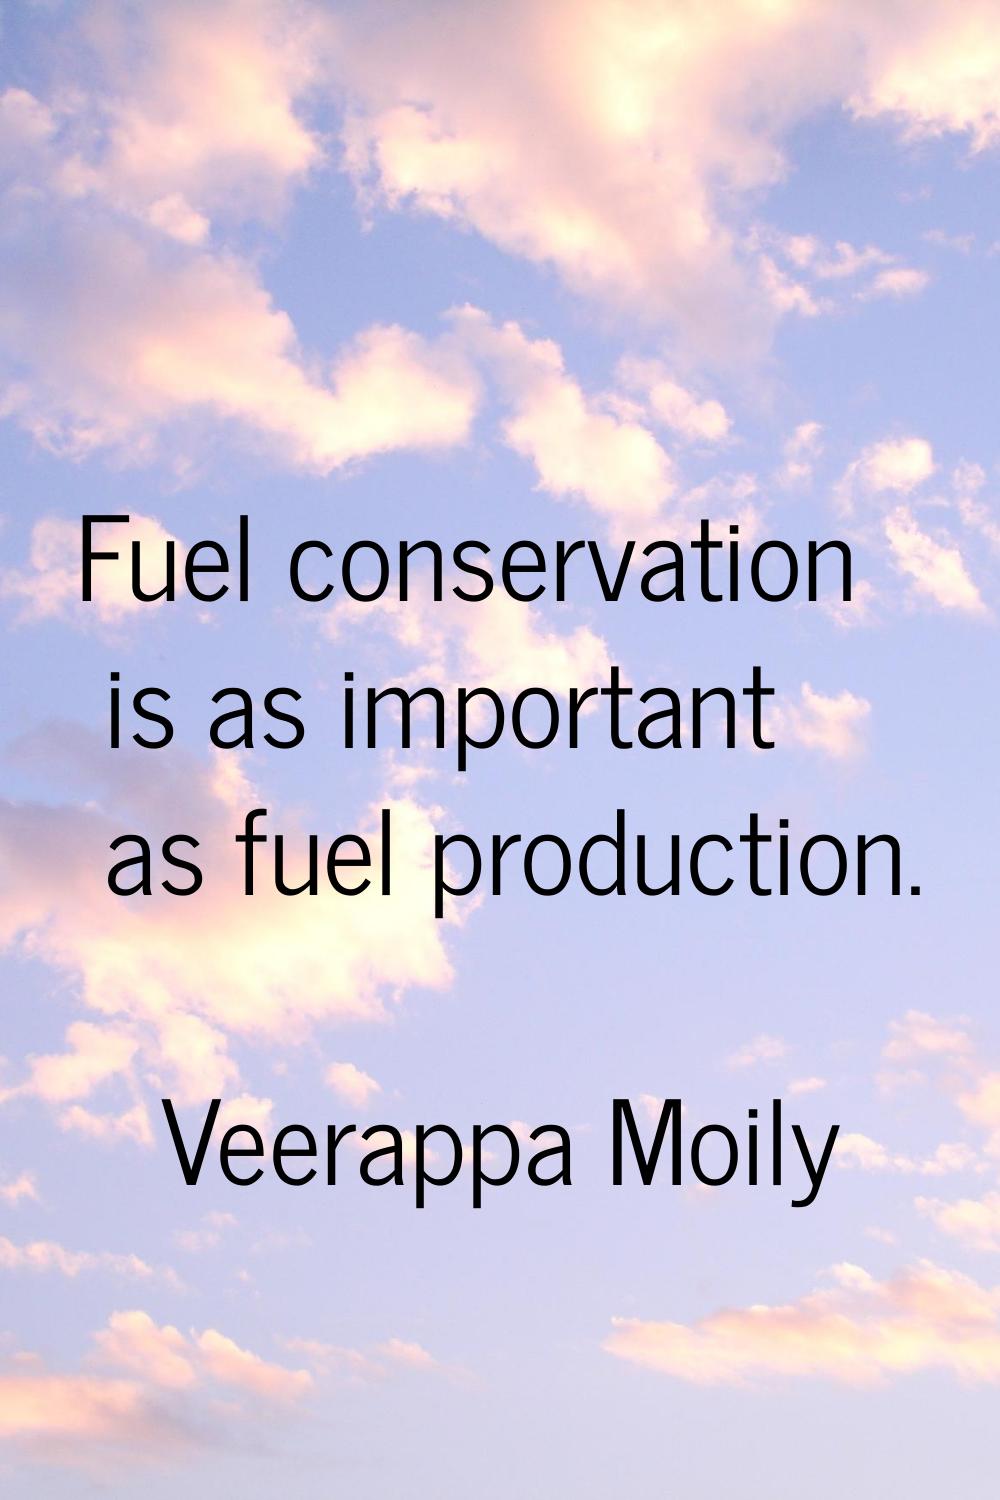 Fuel conservation is as important as fuel production.